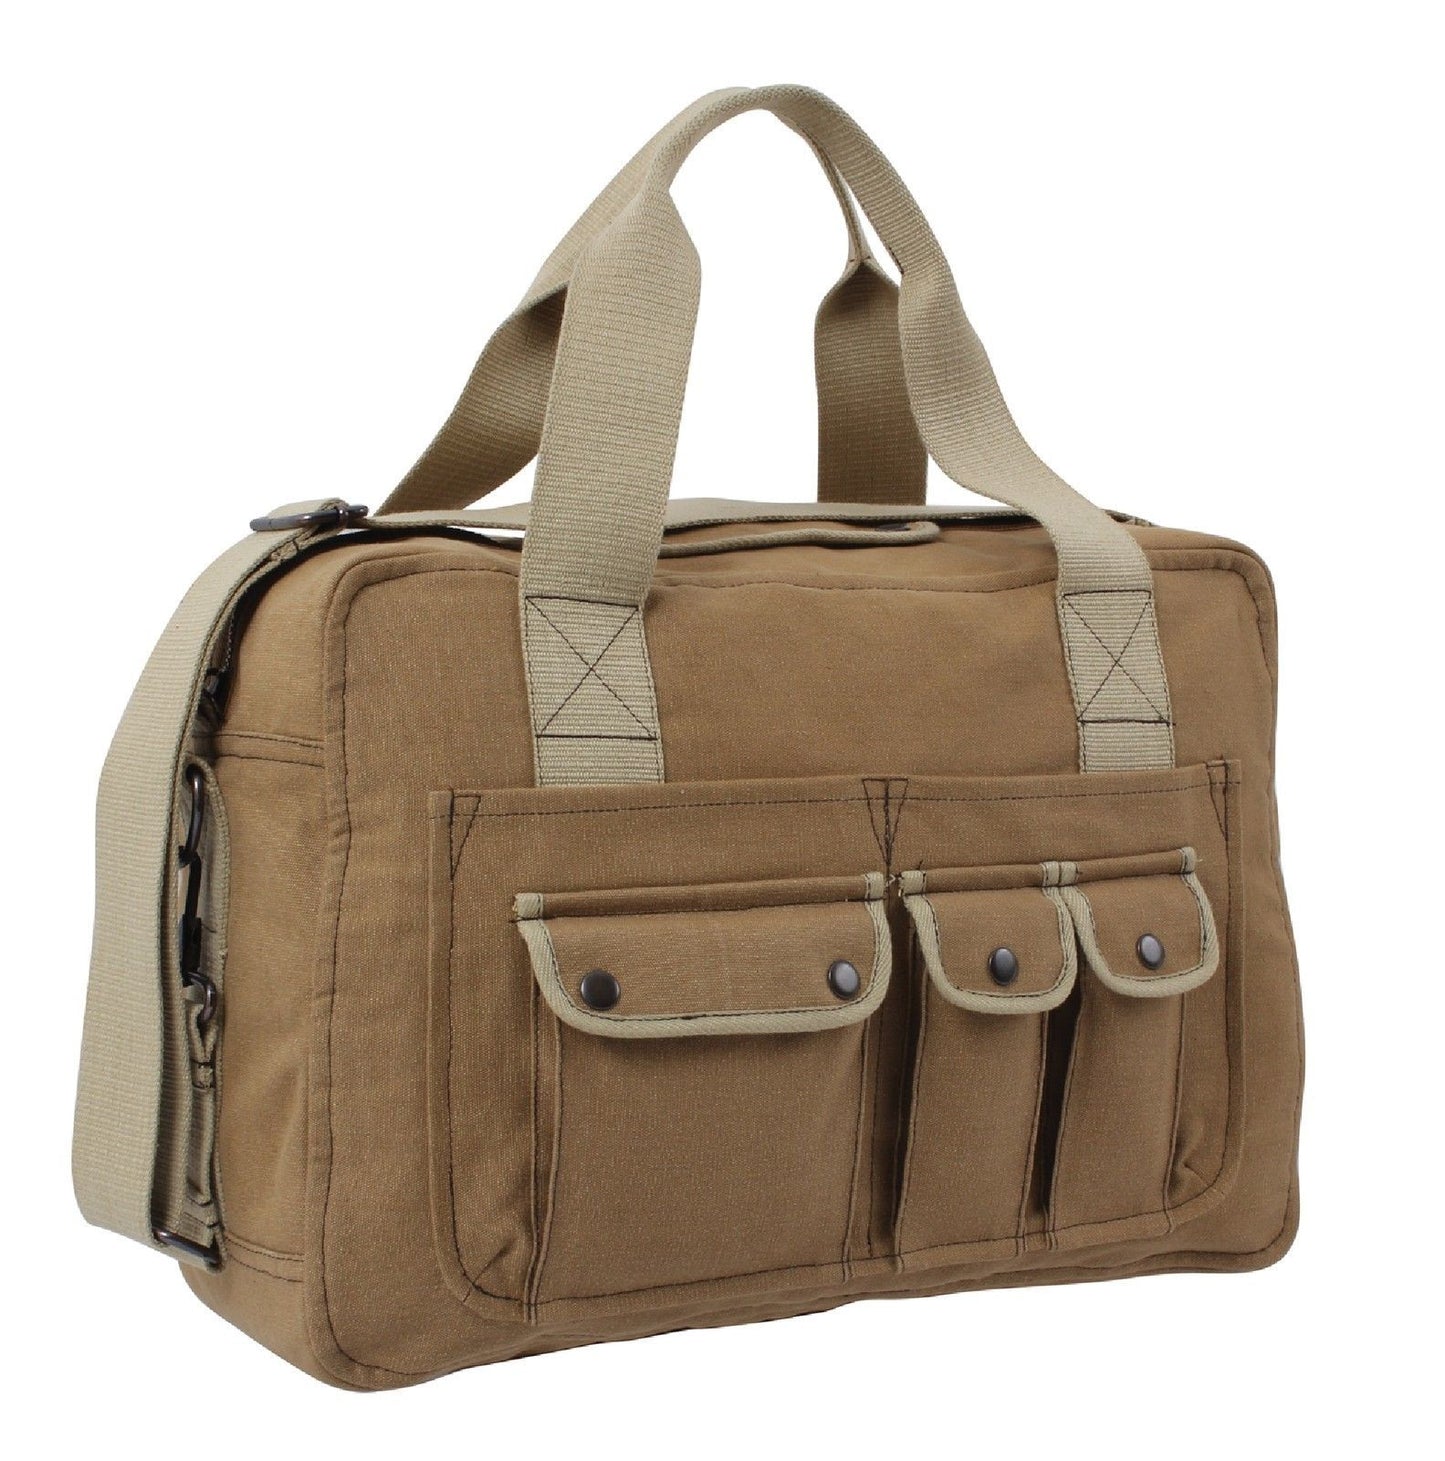 Specialist Carry-All Bag -Mocha and Khaki Vintage 2-Tone